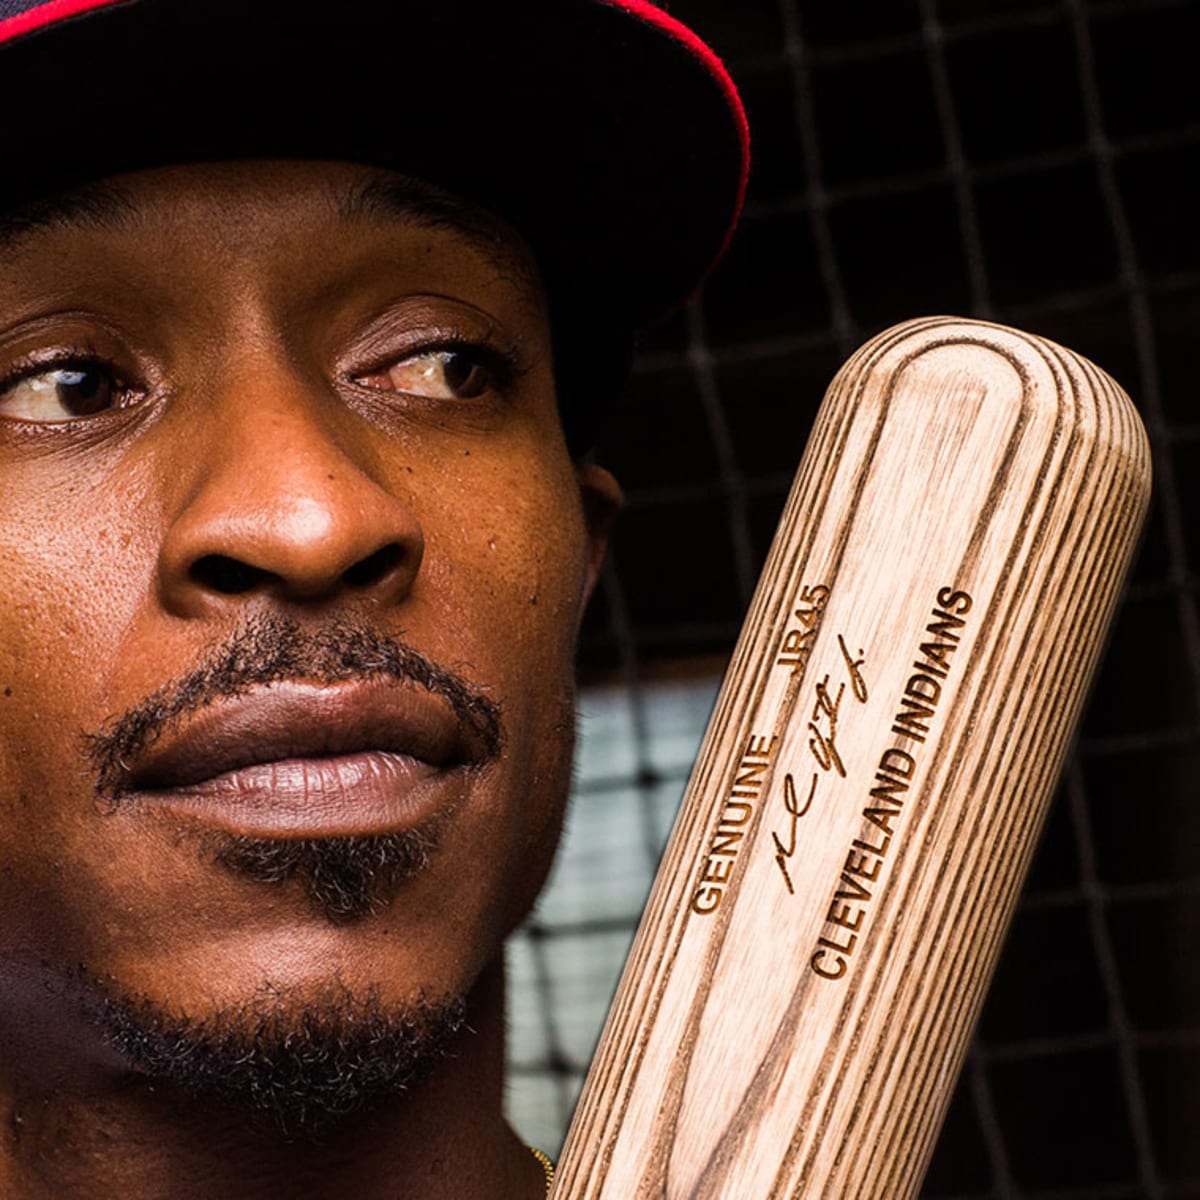 Melvin Upton Jr. changes name to B.J. Upton again - Sports Illustrated